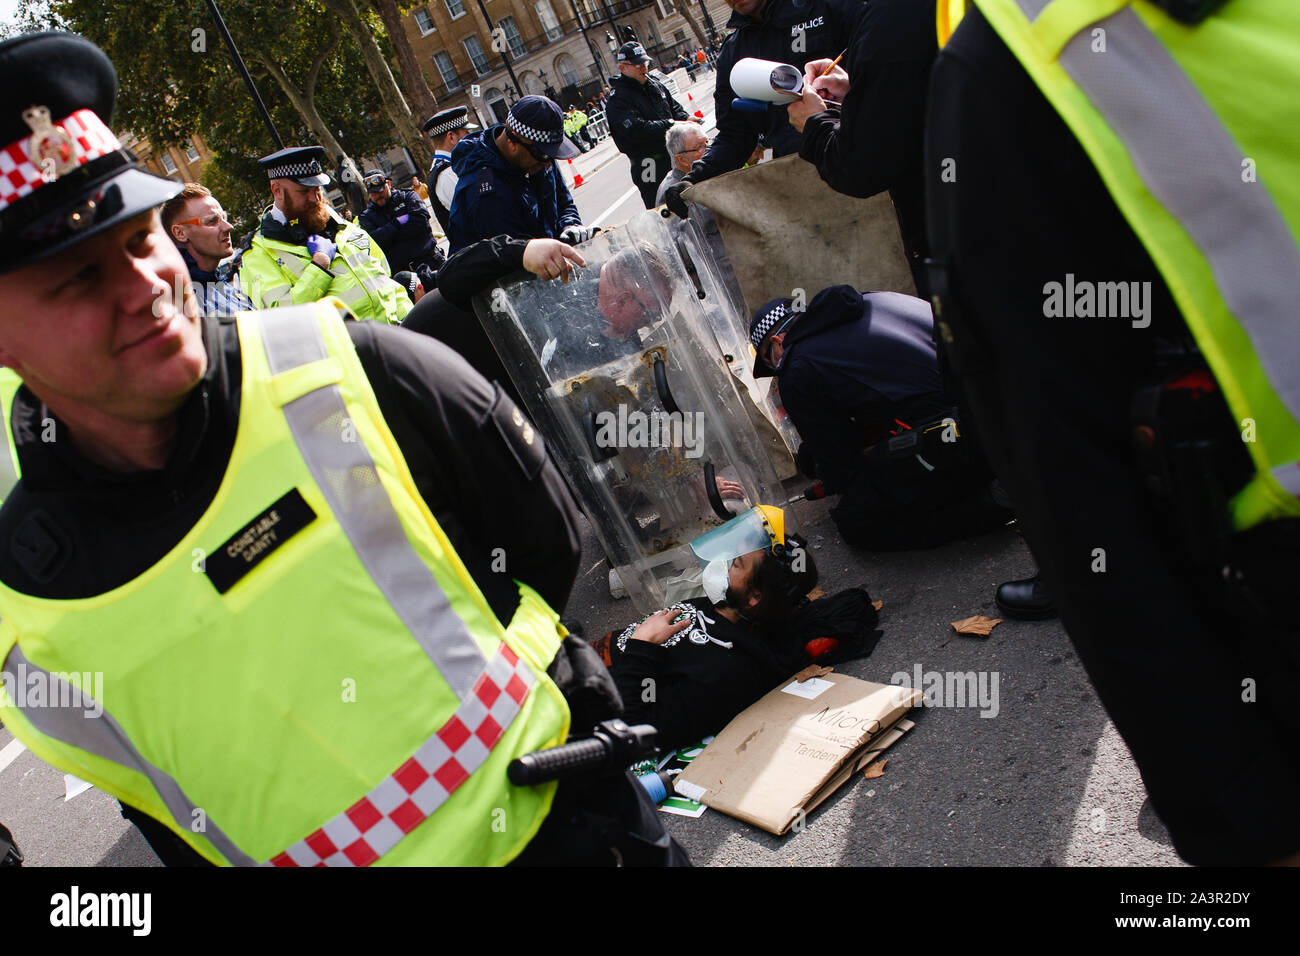 A member of climate change activist movement, Extinction Rebellion (XR) waits to be arrested on Whitehall as police officers use power tools to separate him from another demonstrator during the third day of the group's 'International Rebellion' in London.Police officers continue to clear demonstrators and tents from sites across Westminster, with activists having been warned about moving to a designated protest area around Nelson's Column in Trafalgar Square or face arrest. Similar blockades by Extinction Rebellion in April, at sites including Oxford Circus and Waterloo Bridge, saw more than 1 Stock Photo